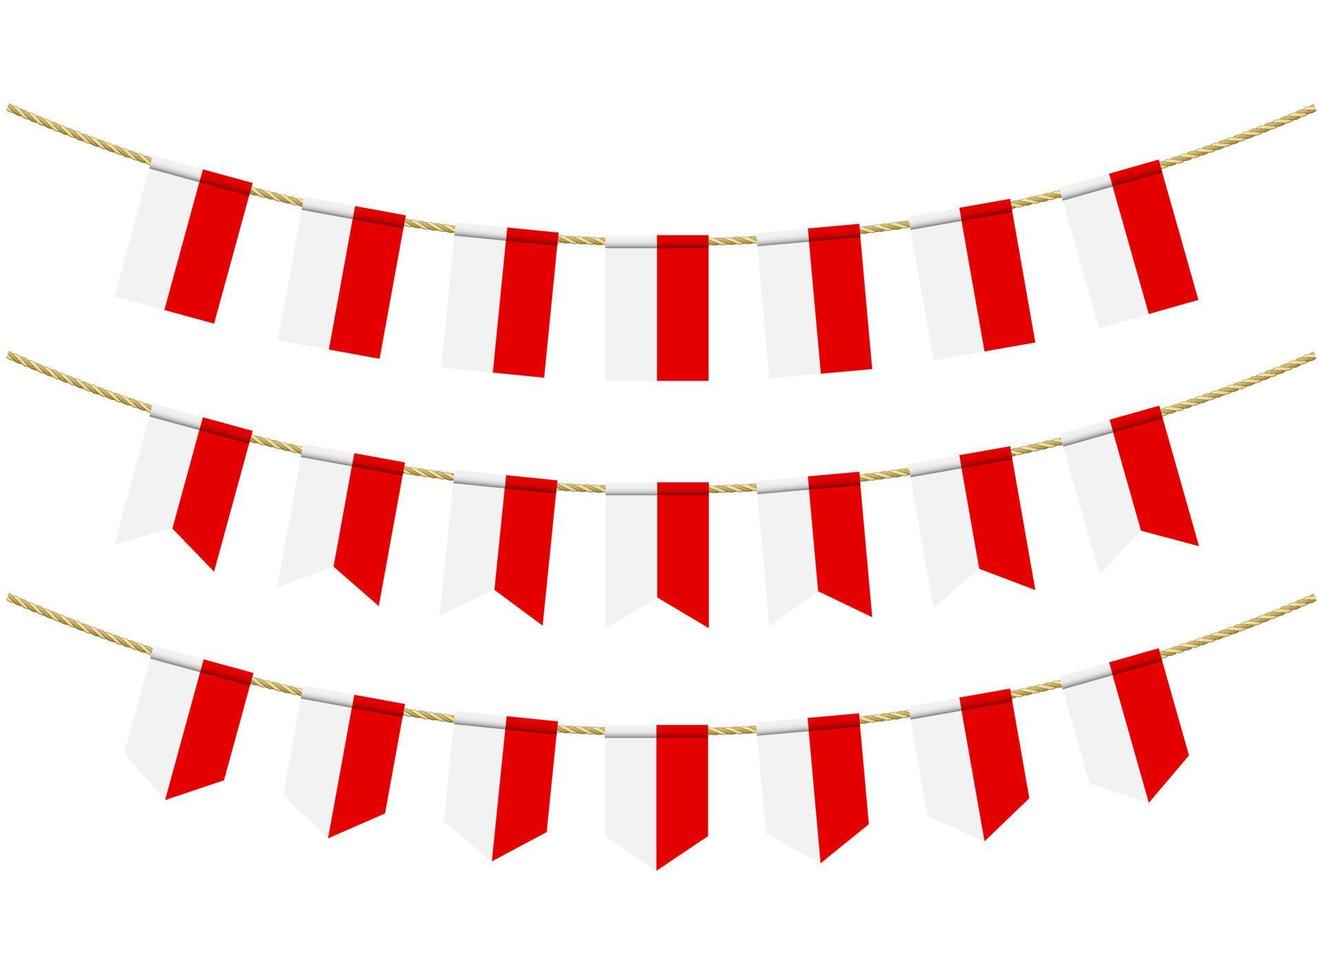 Monaco flag on the ropes on white background. Set of Patriotic bunting flags. Bunting decoration of Monaco flag vector